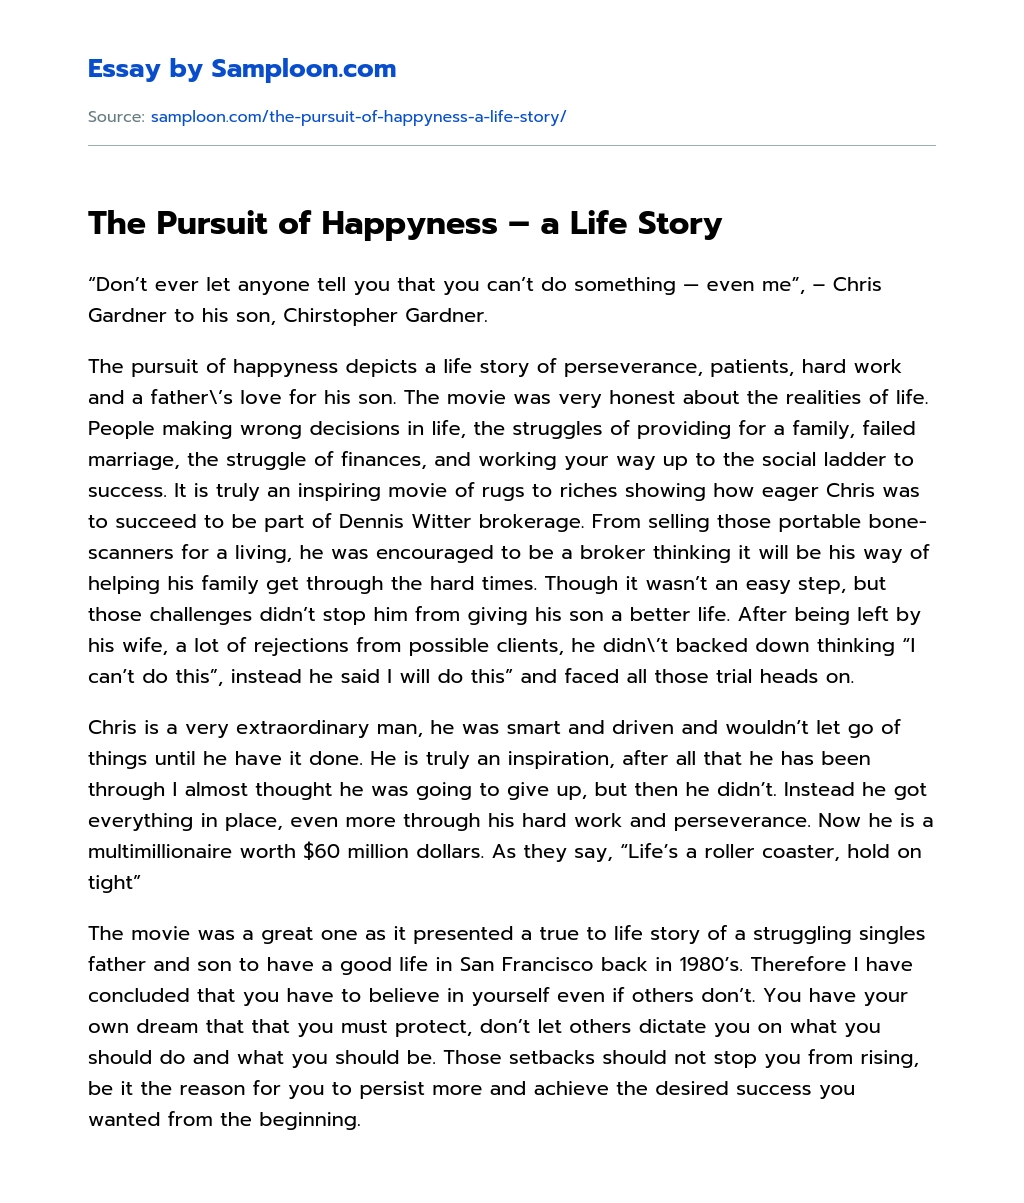 The Pursuit of Happyness – a Life Story essay